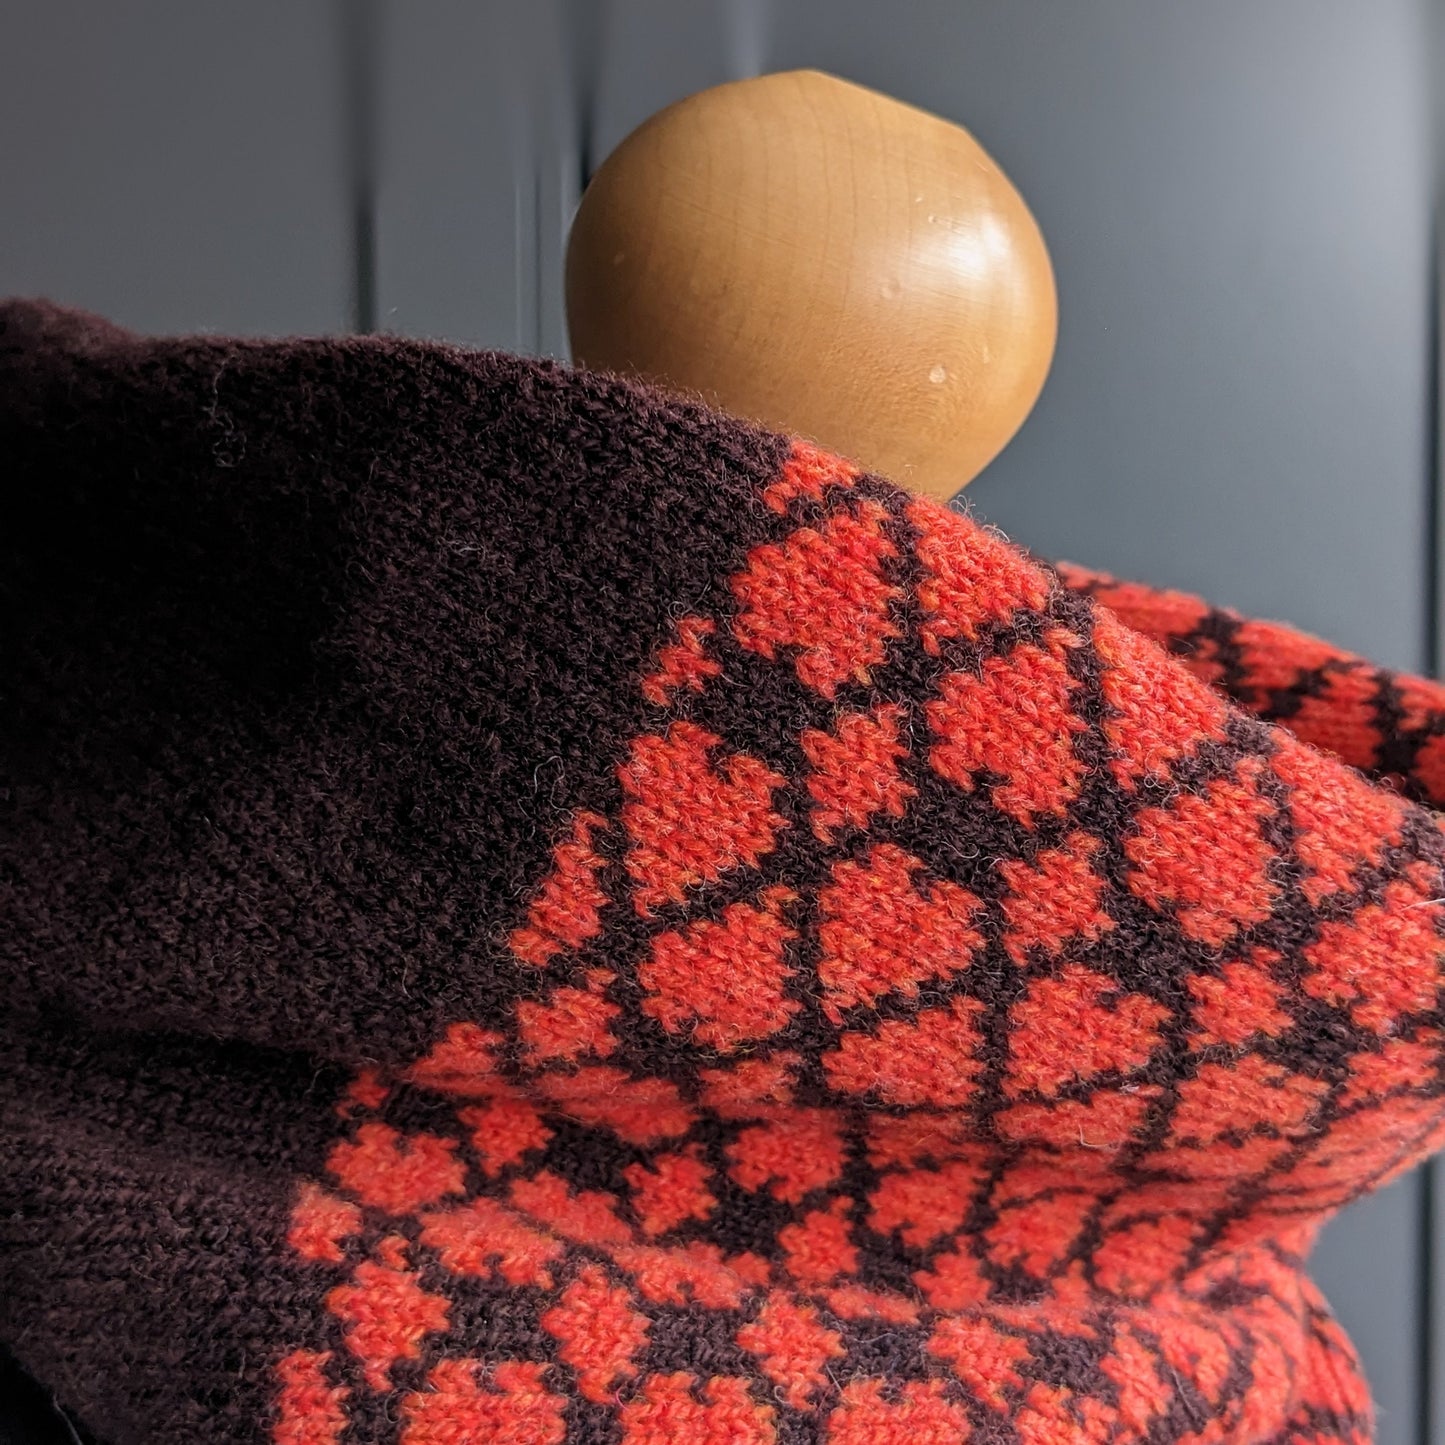 Lambswool knitted Fair Isle cowl in heart design - orange and brown